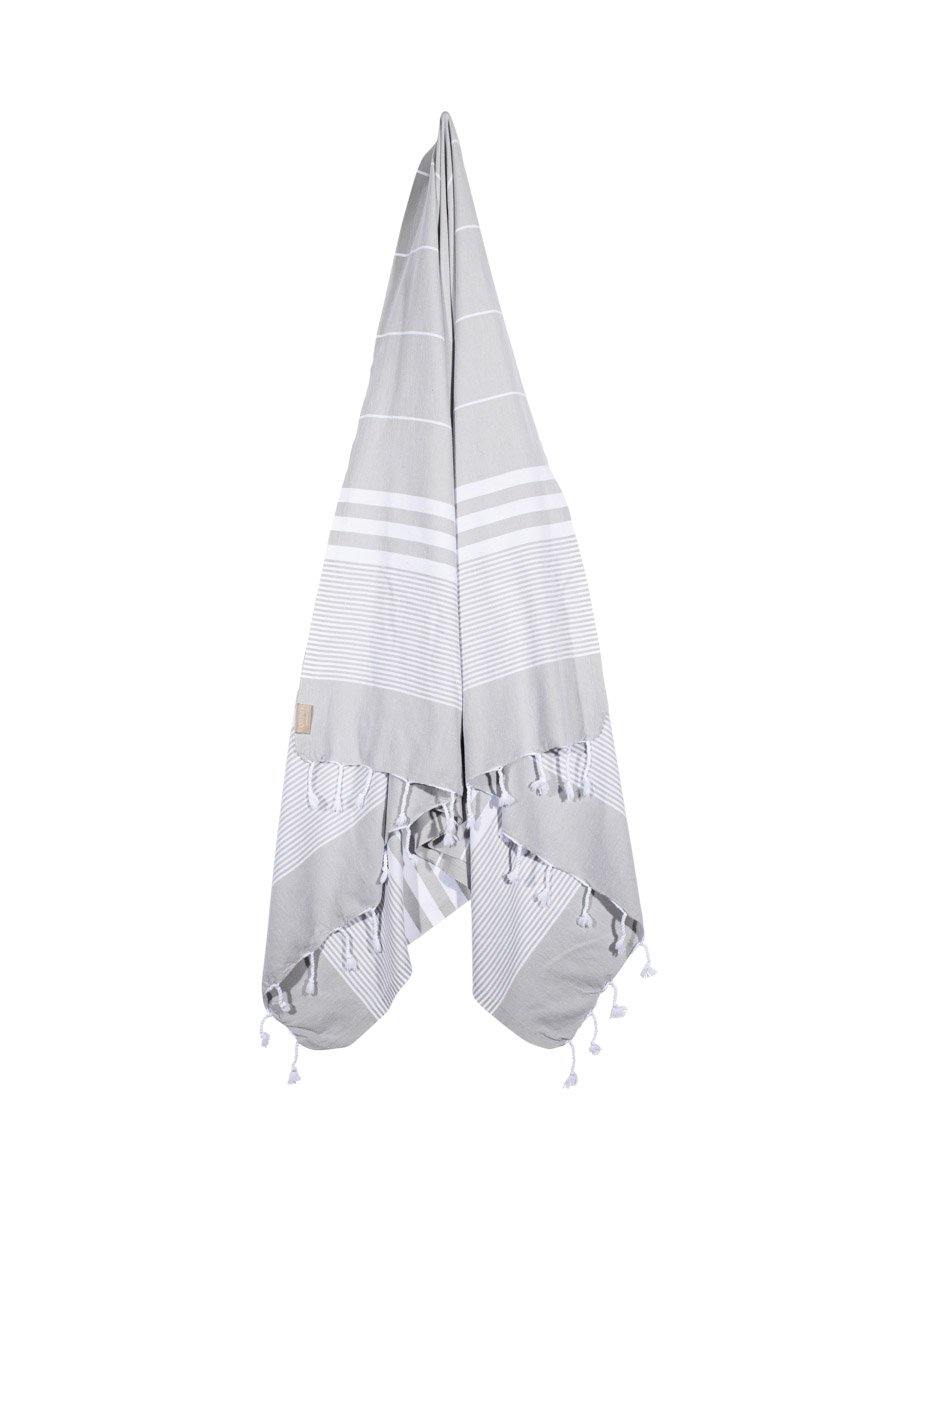 Kali - Grey and White Striped Quick Drying Towel Hanging